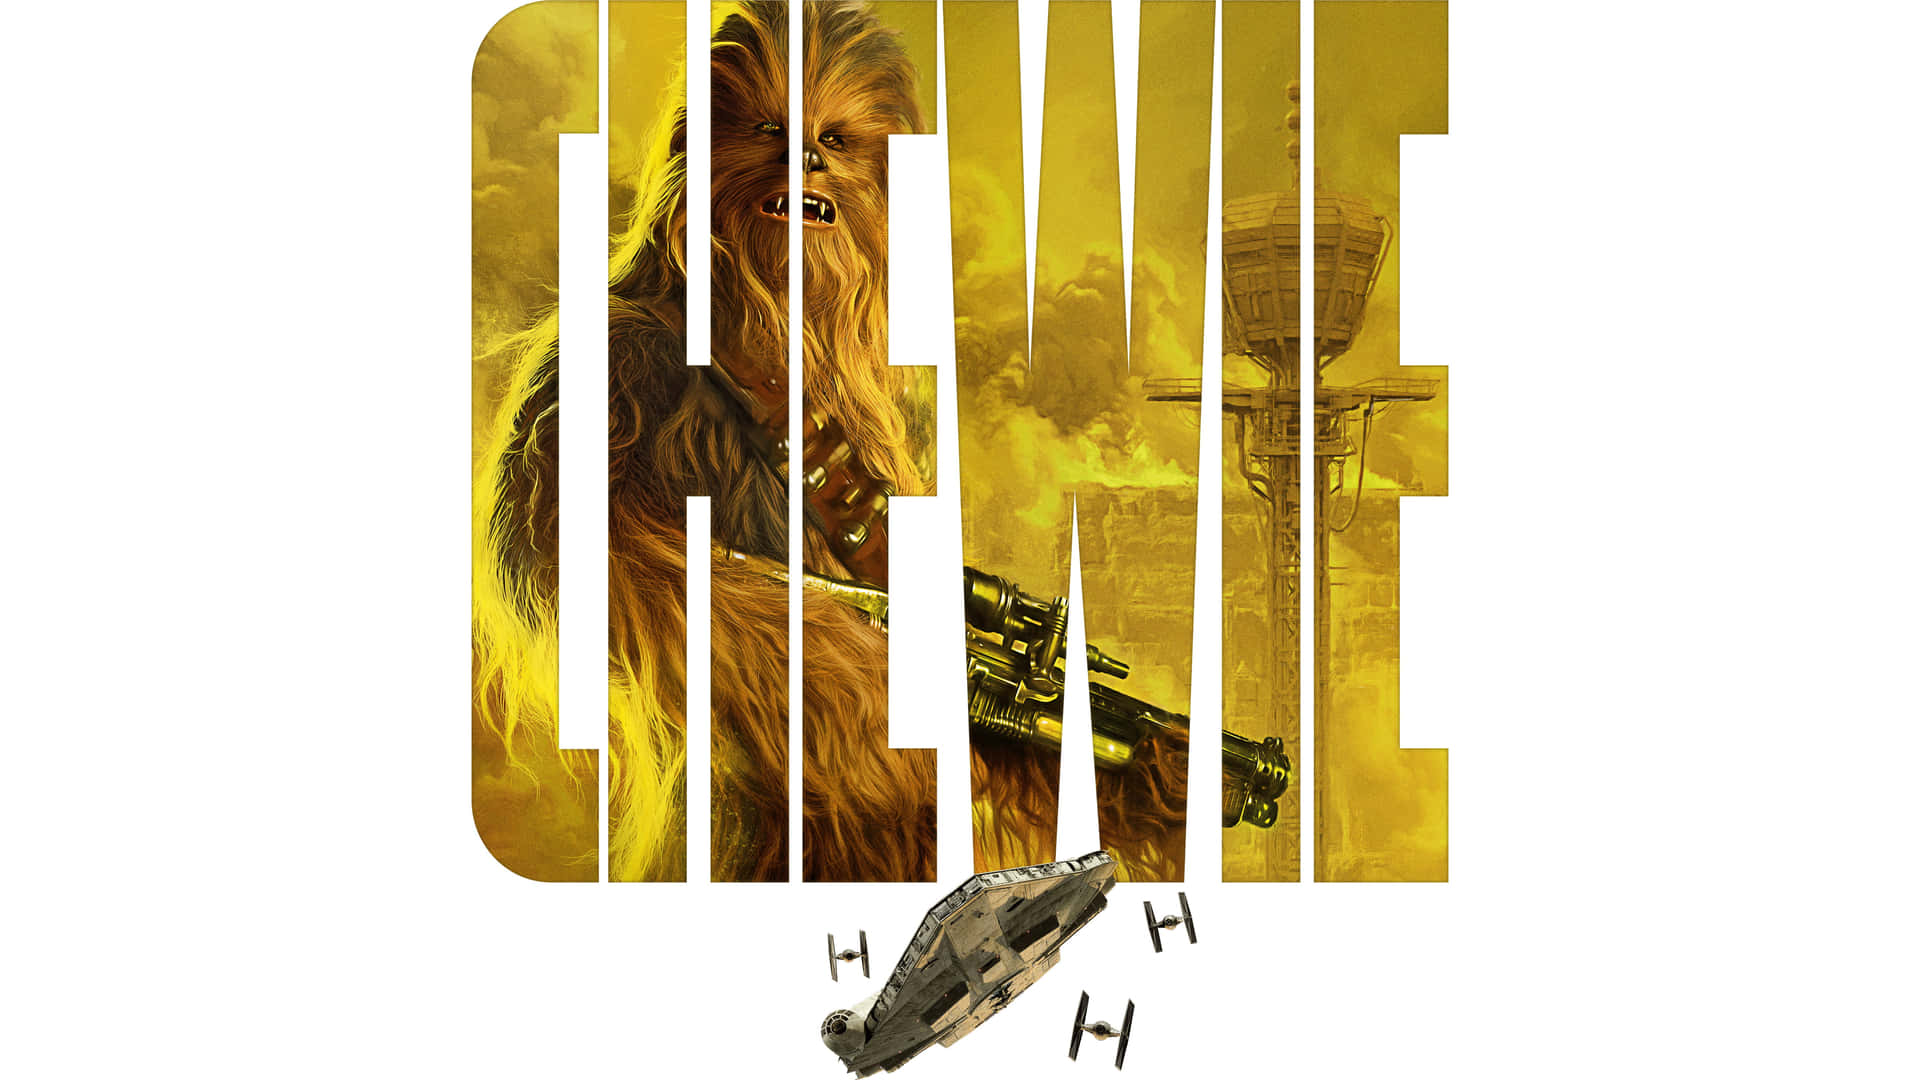 Wookiee standing noble against the galactic backdrop Wallpaper